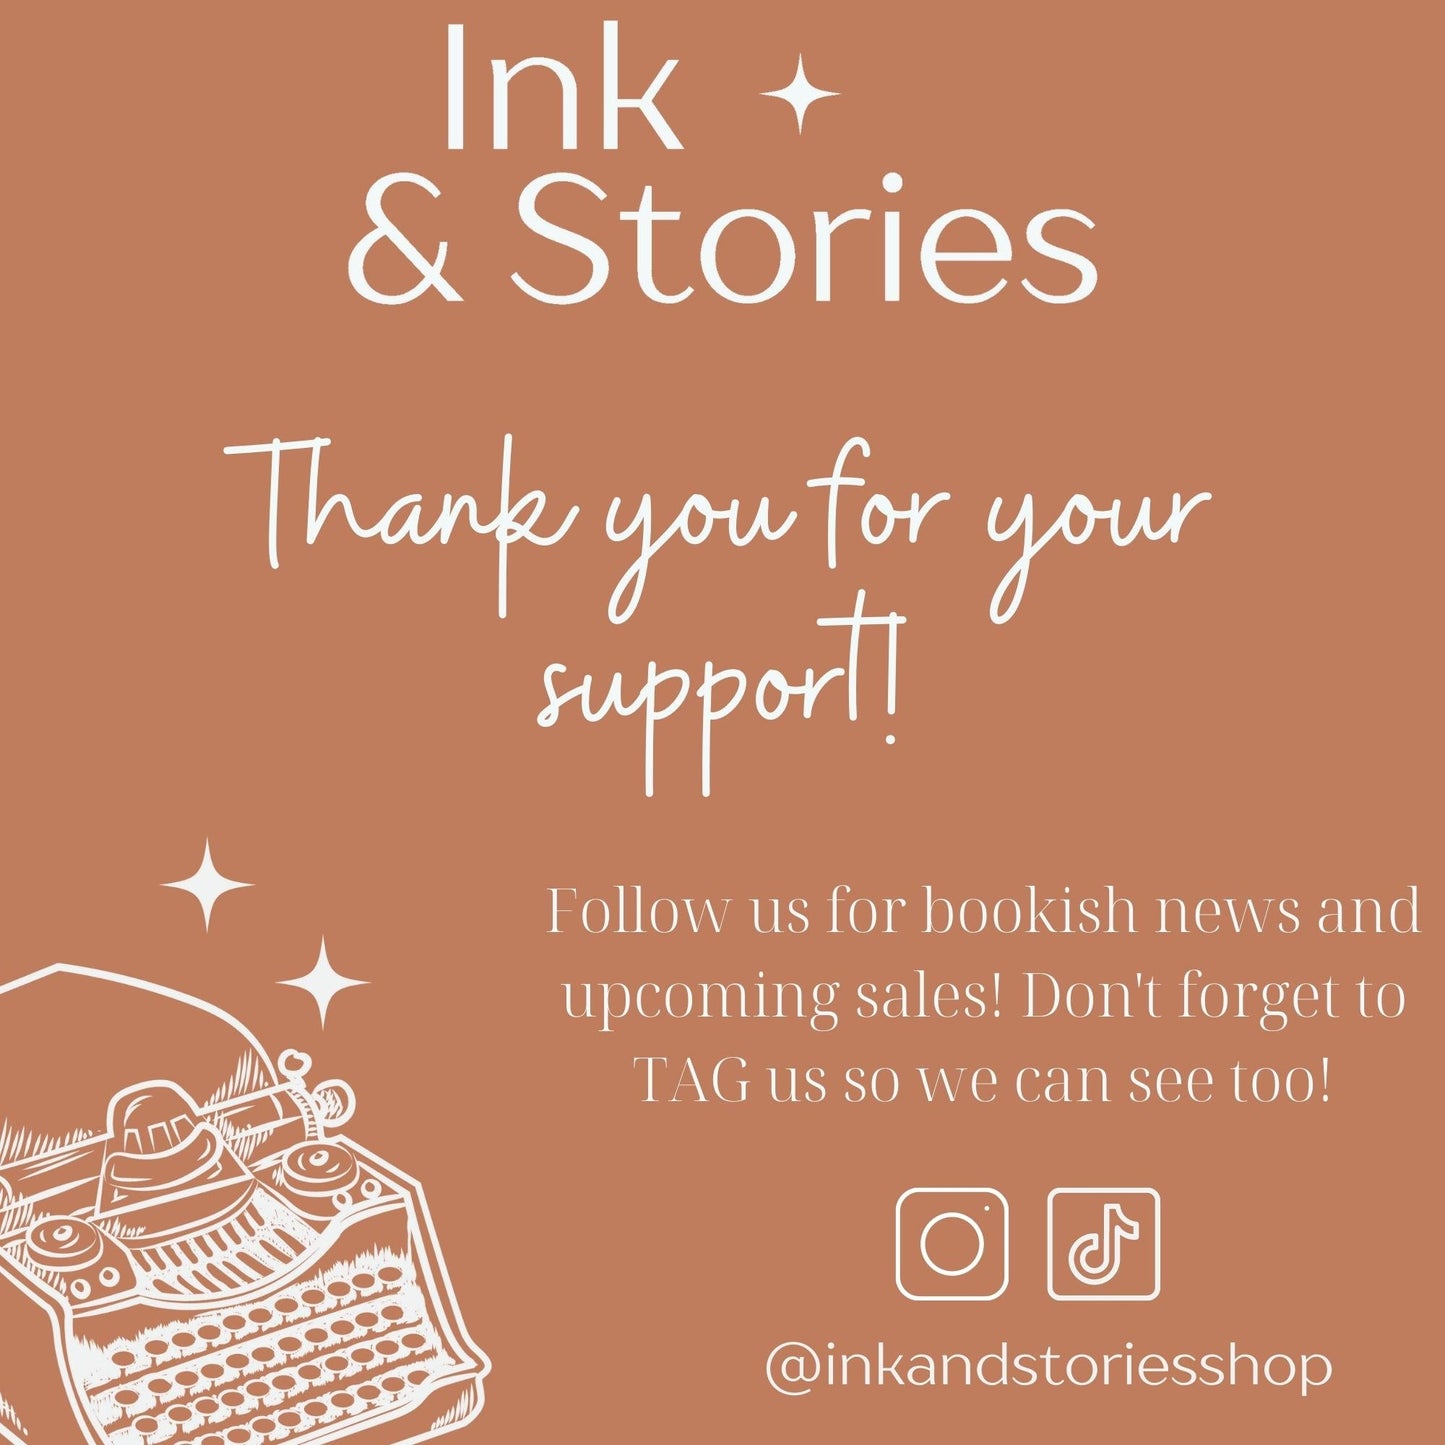 Ink and Stories social media thank you card